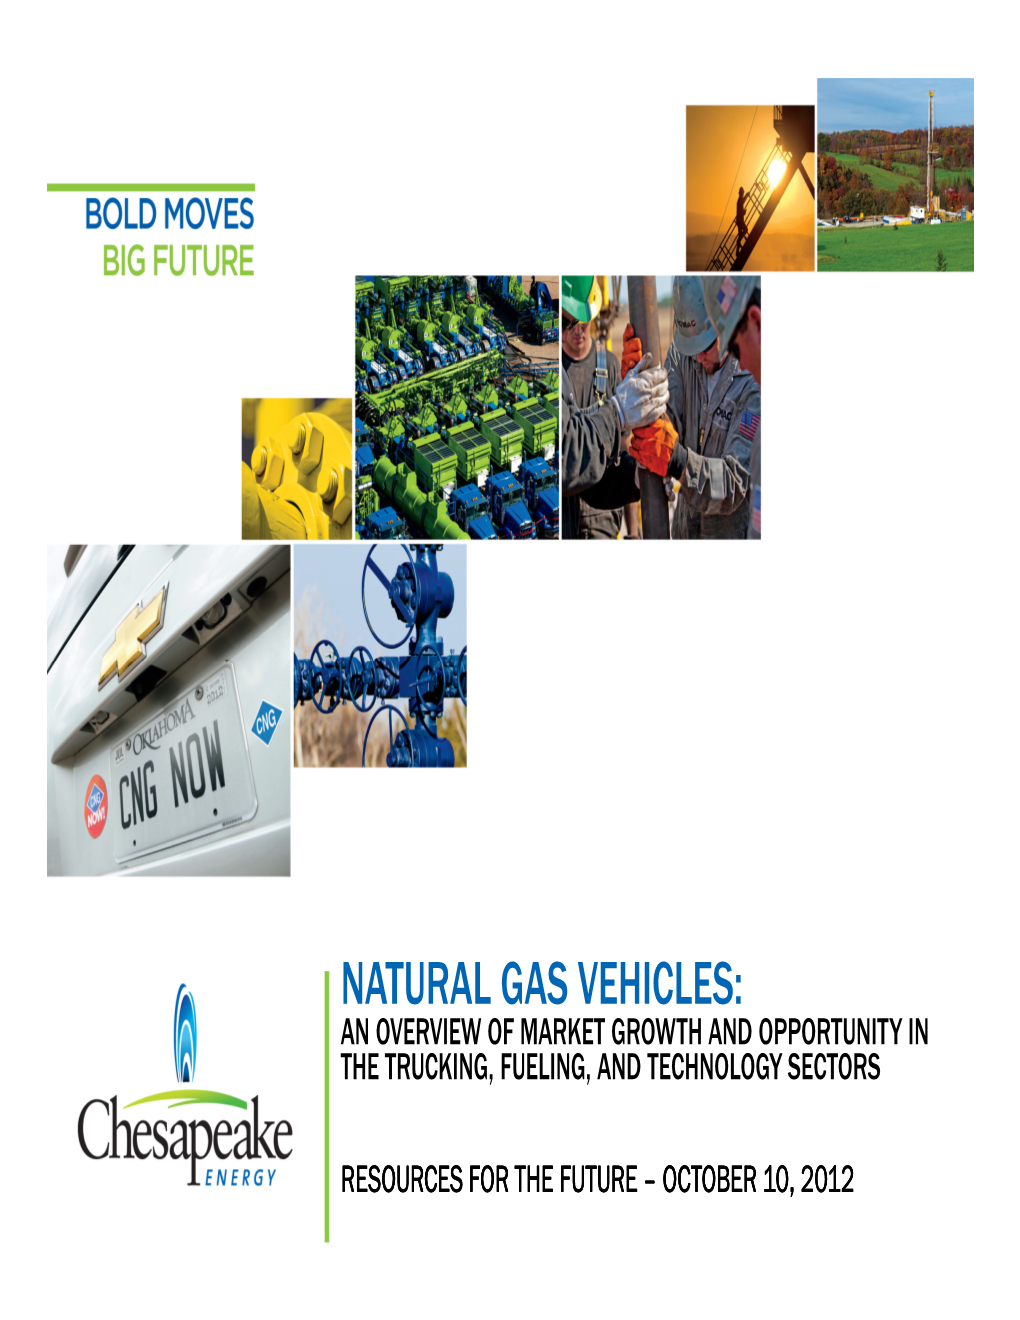 Natural Gas Vehicles: an Overview of Market Growth and Opportunity in the Trucking, Fueling, and Technology Sectors